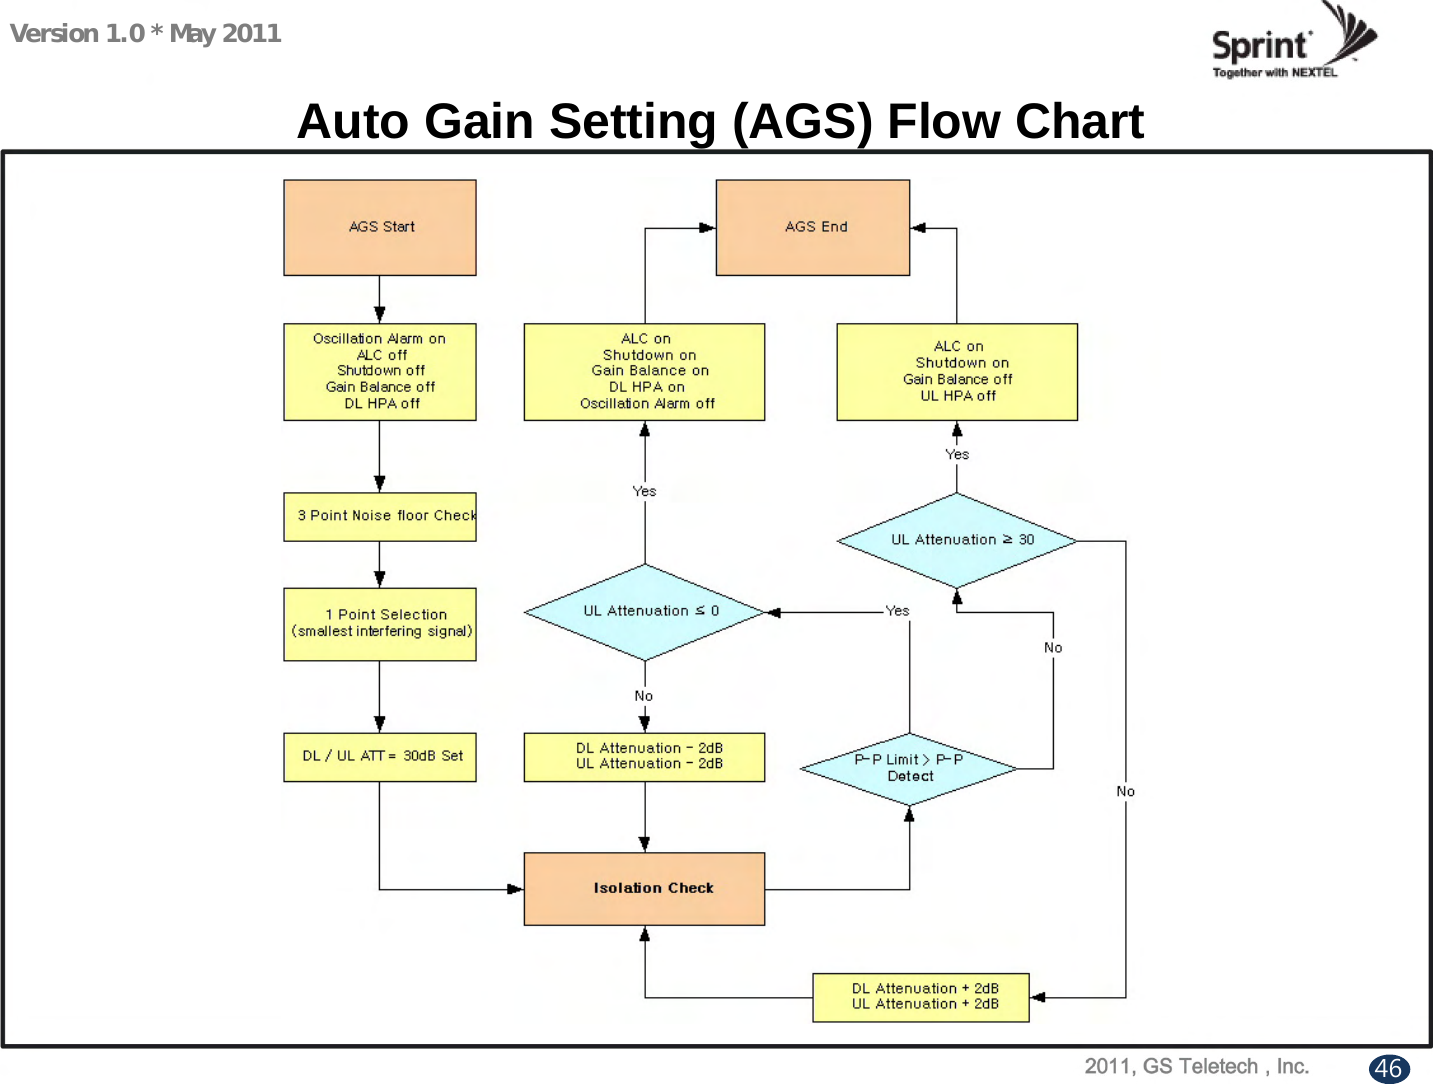 Version 1.0 * May 2011Auto Gain Setting (AGS) Flow Chart46